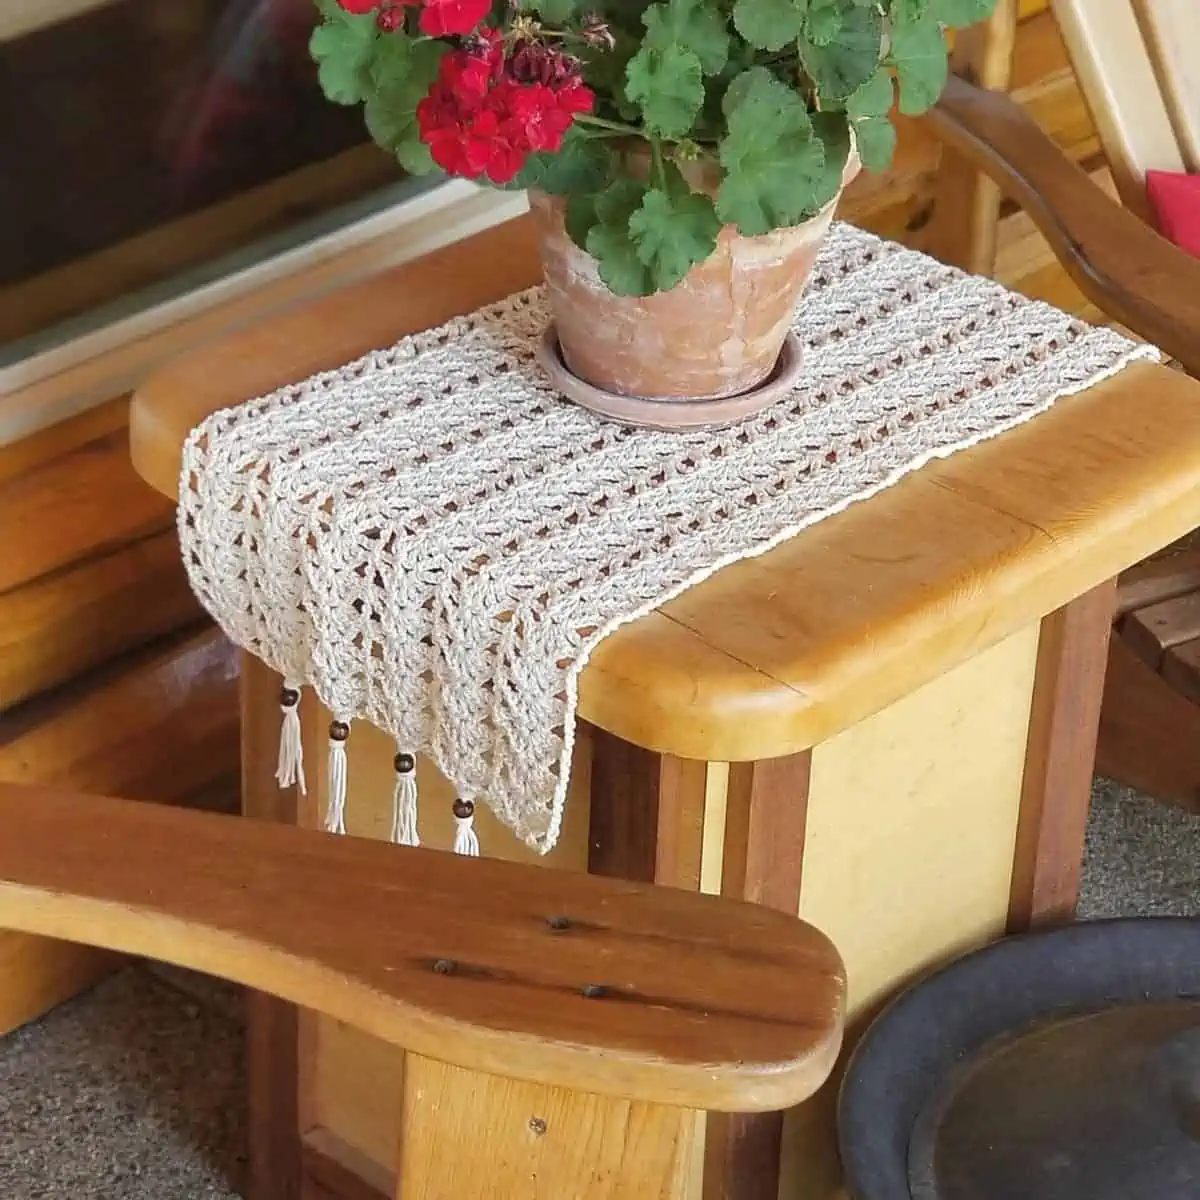 small side table with a crochet table runner and plant on it